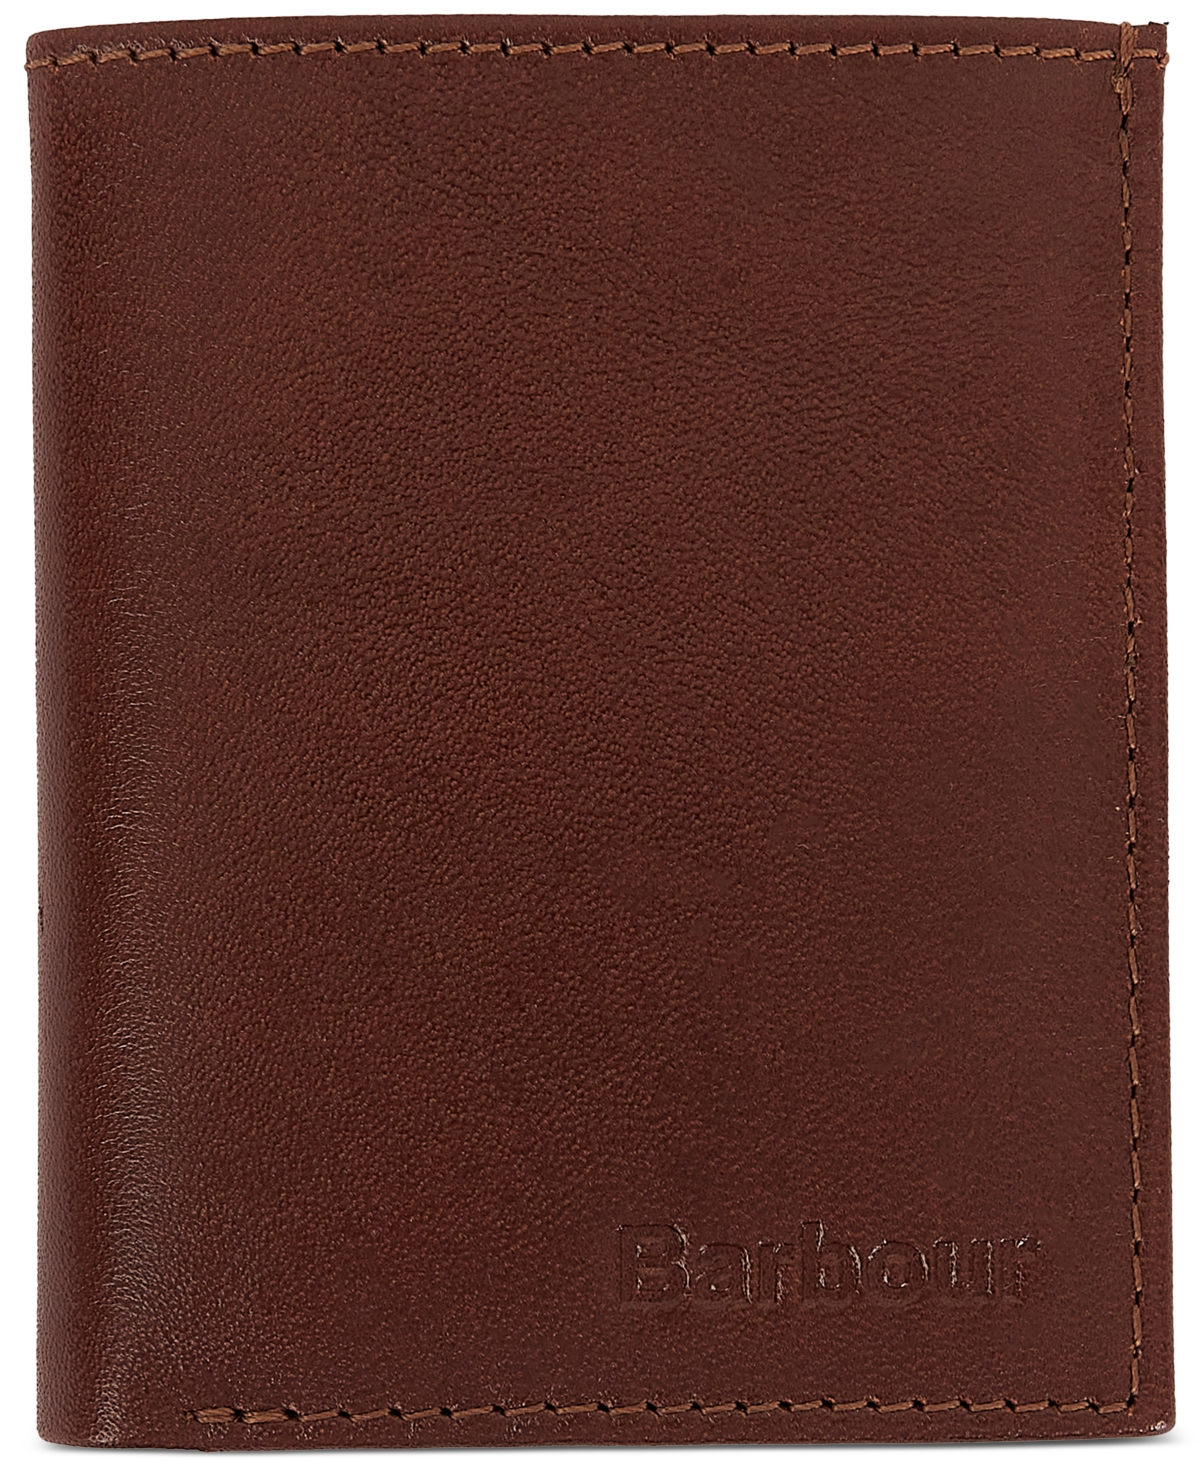 Men's Colwell Small Leather Billfold Wallet - Brown/clas